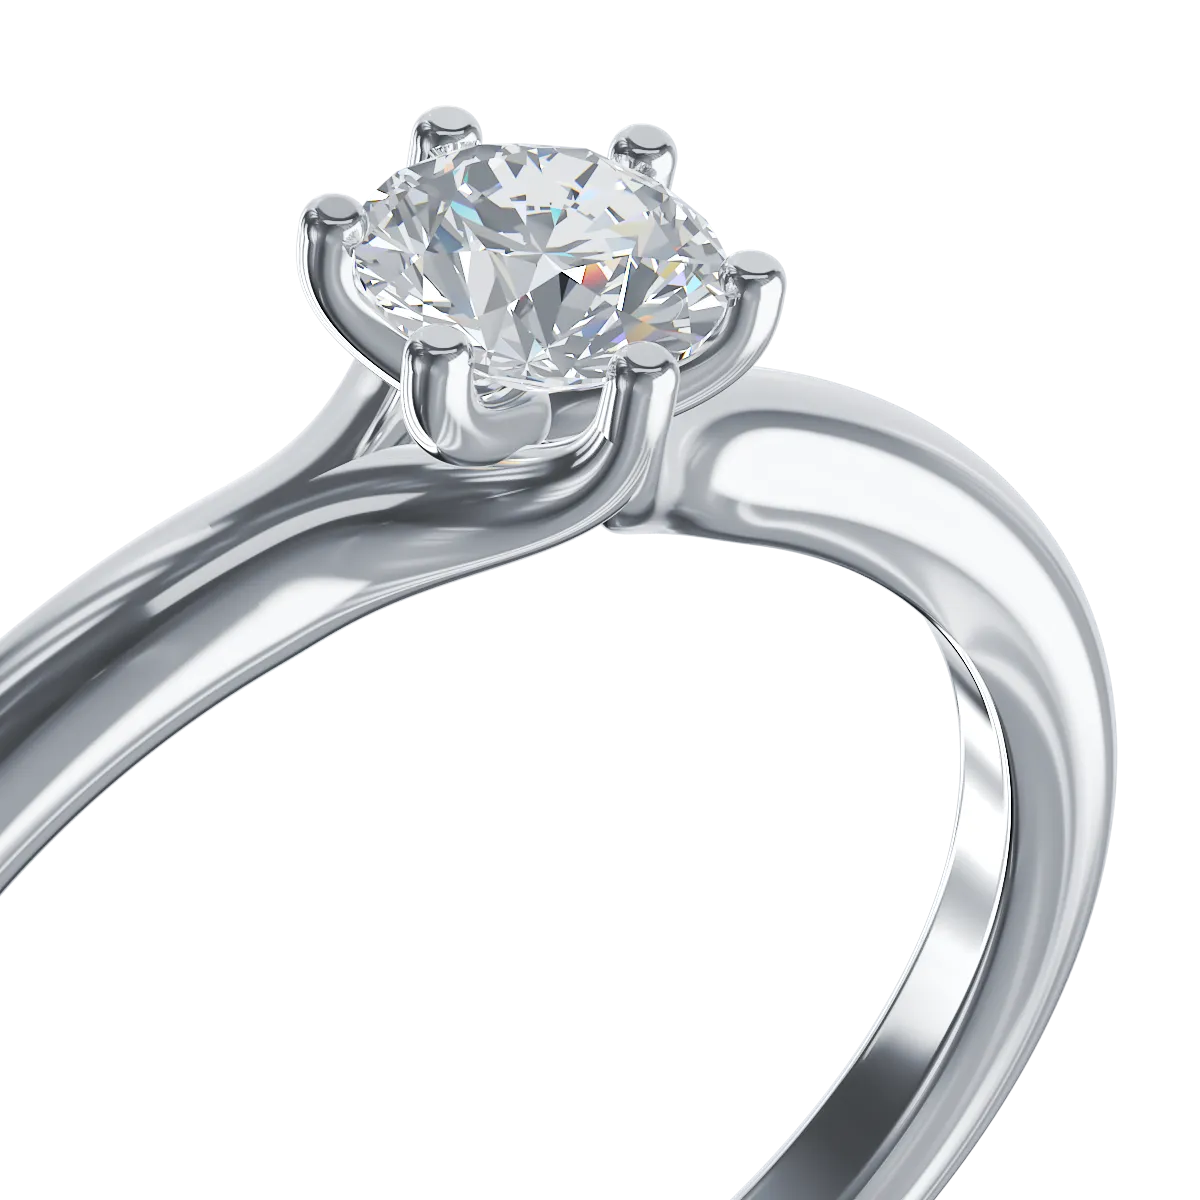 Platinum engagement ring with a 0.31ct solitaire diamond